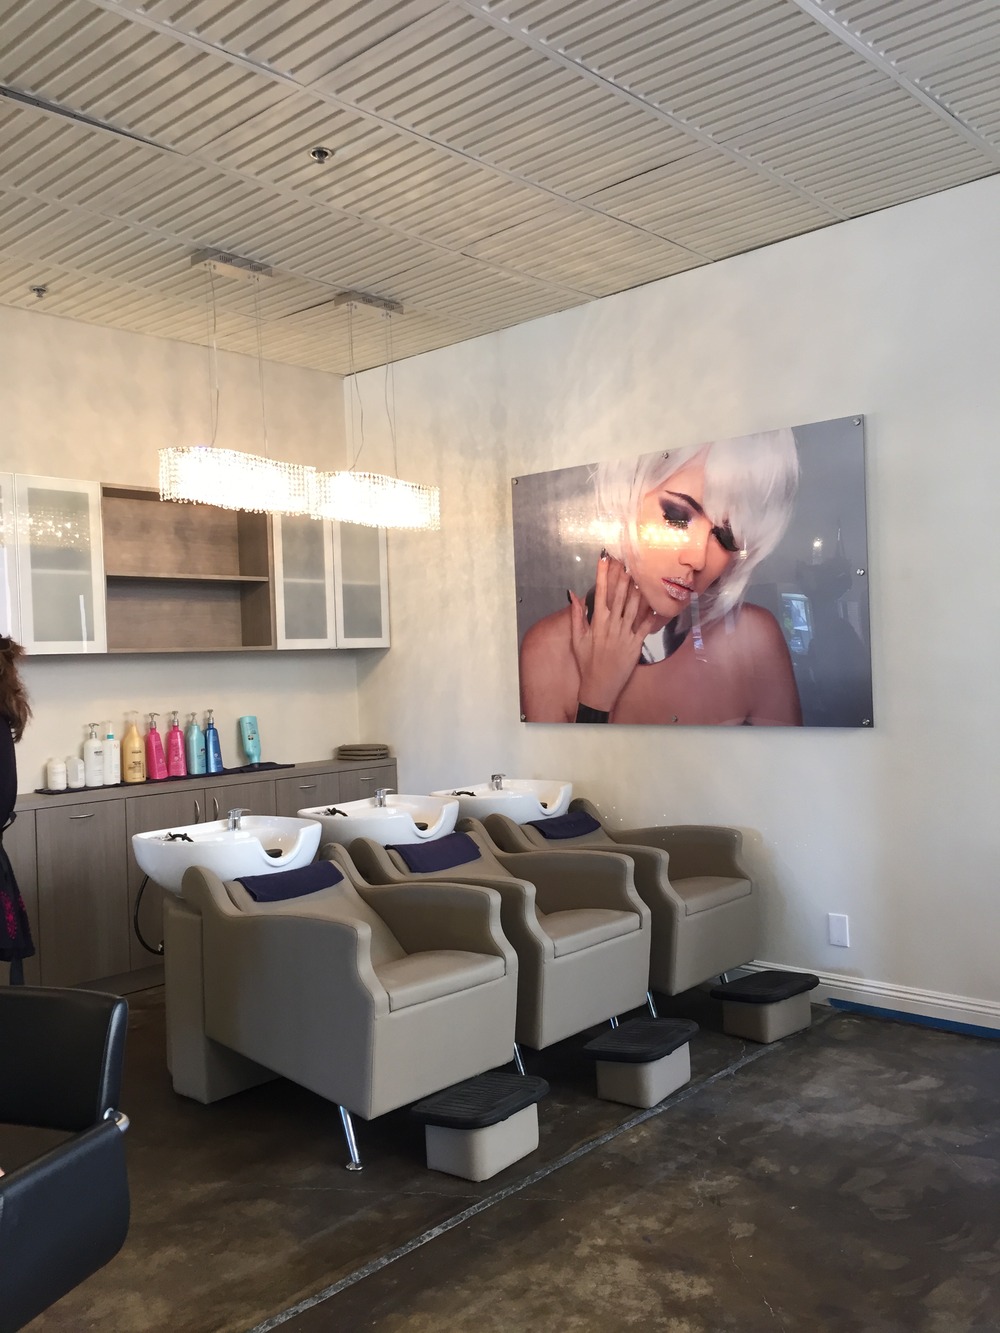 Image of a girl in a salon